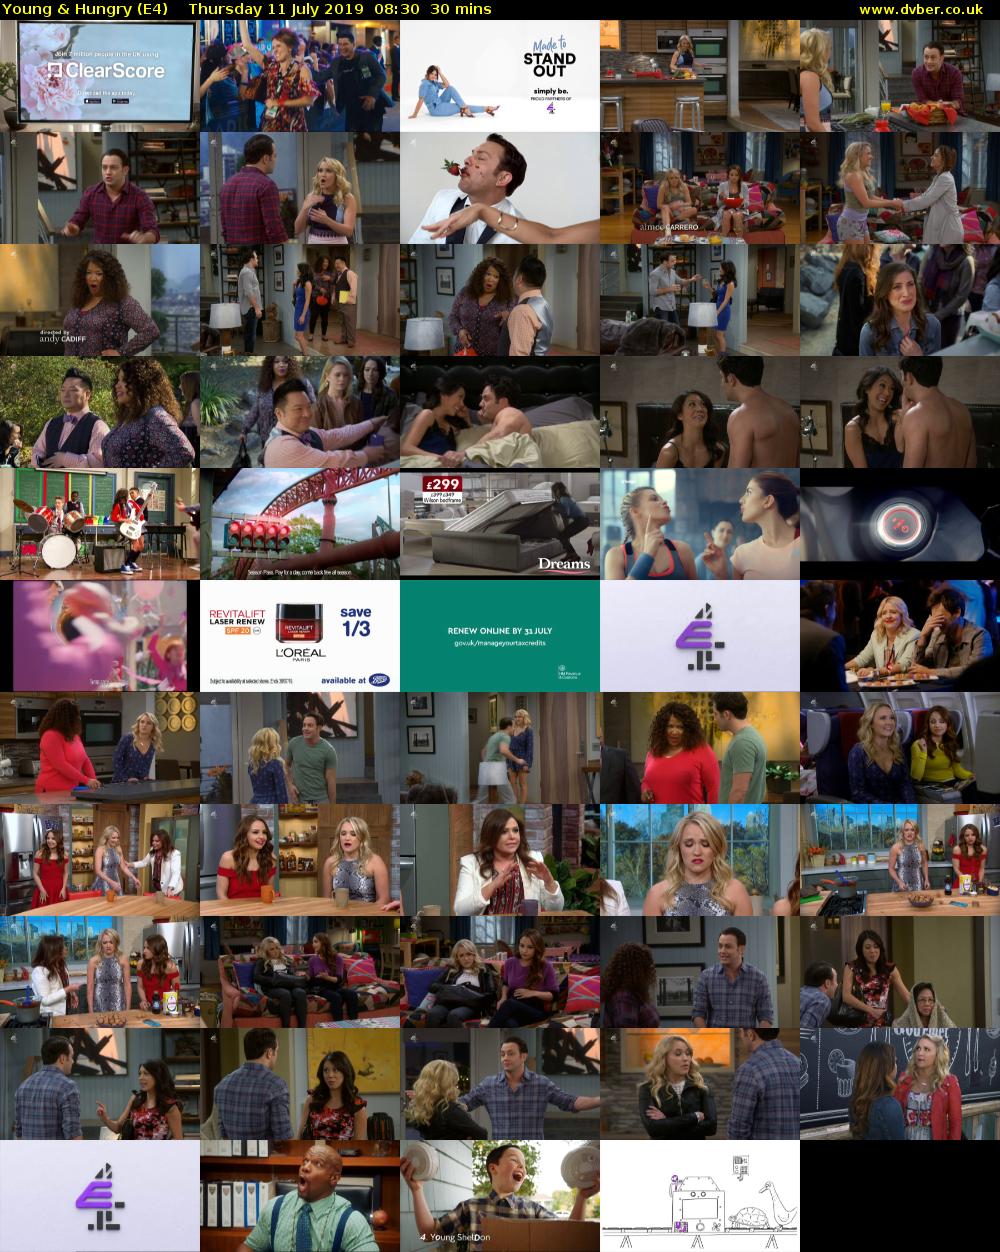 Young & Hungry (E4) Thursday 11 July 2019 08:30 - 09:00